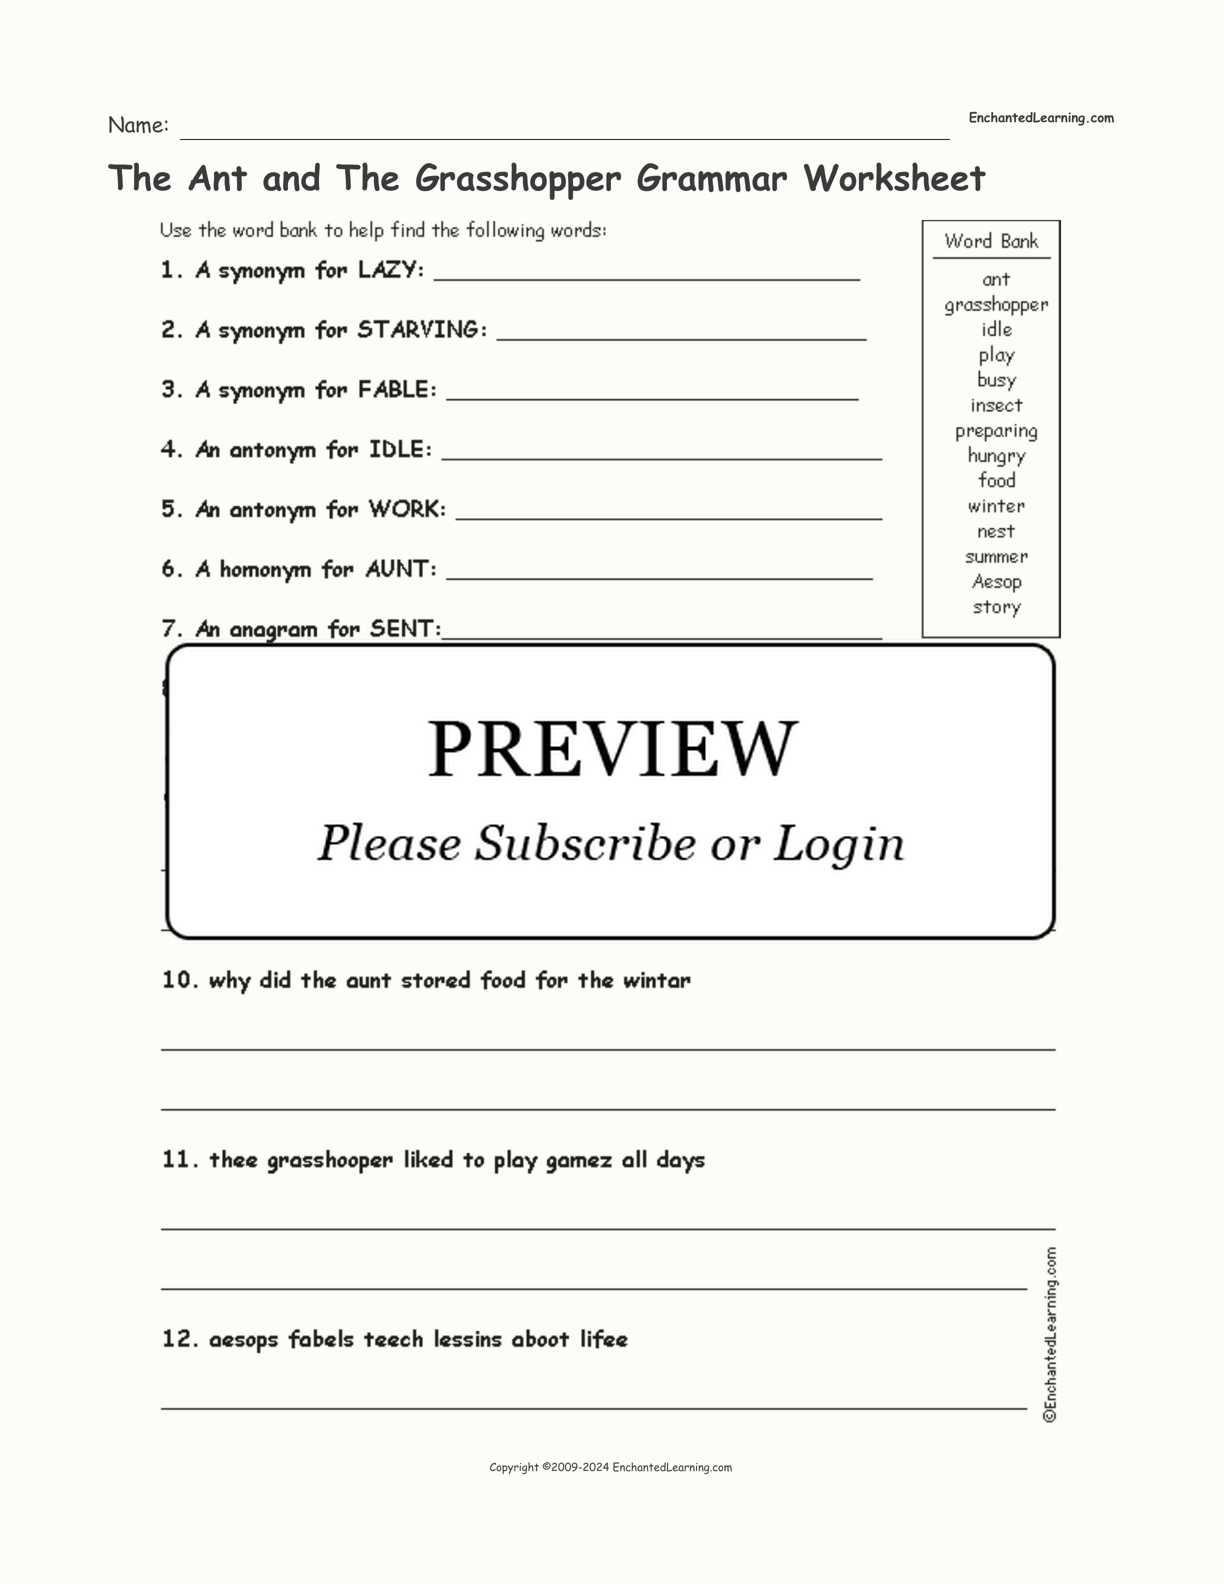 The Ant and The Grasshopper Grammar Worksheet interactive worksheet page 1